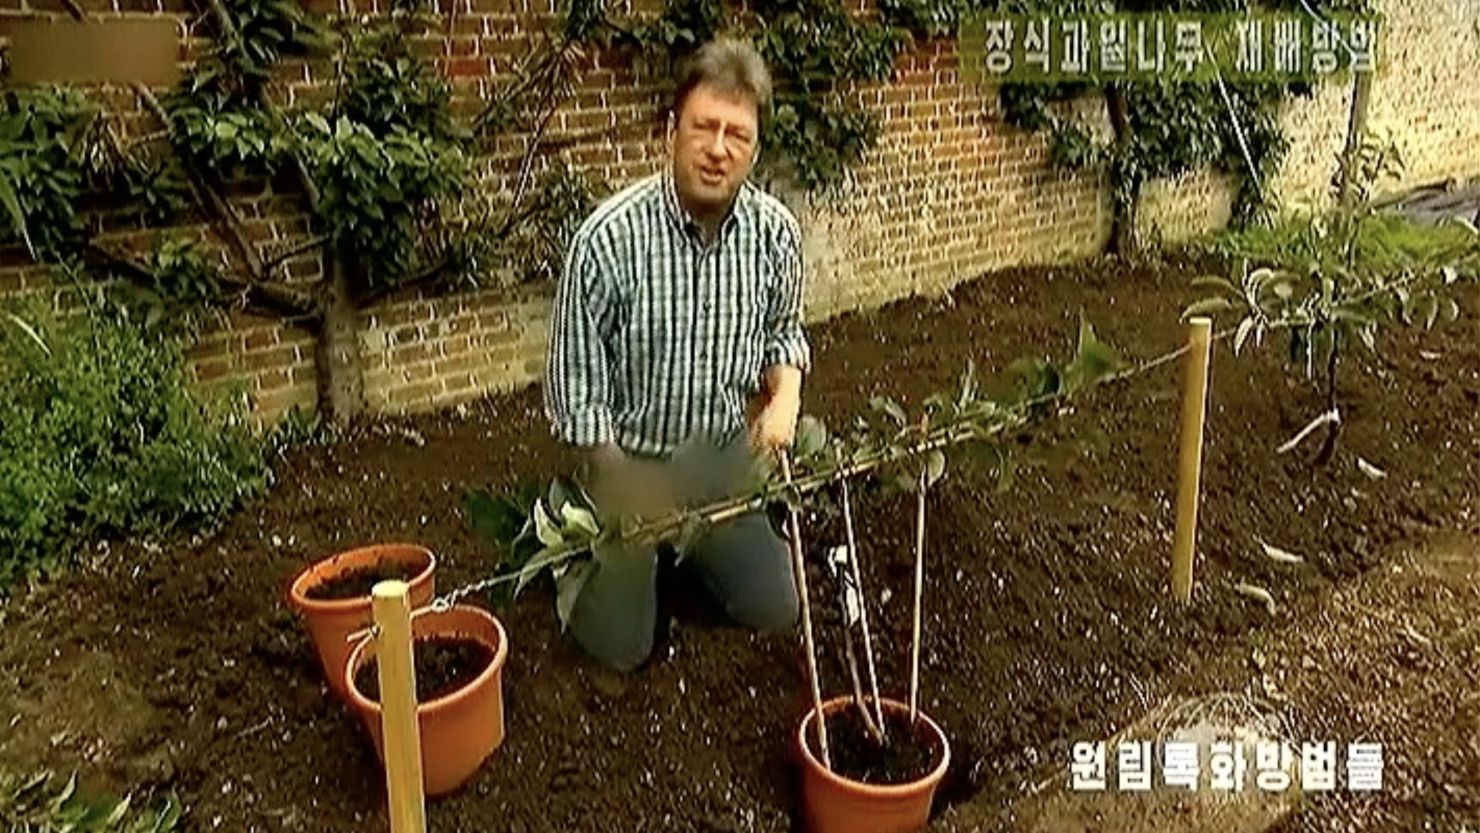 Alan Titchmarsh appears in the BBC TV series "Garden Secrets," which was rebroadcast by North Korea's KCTV with a blur applied to the jeans he's wearing.